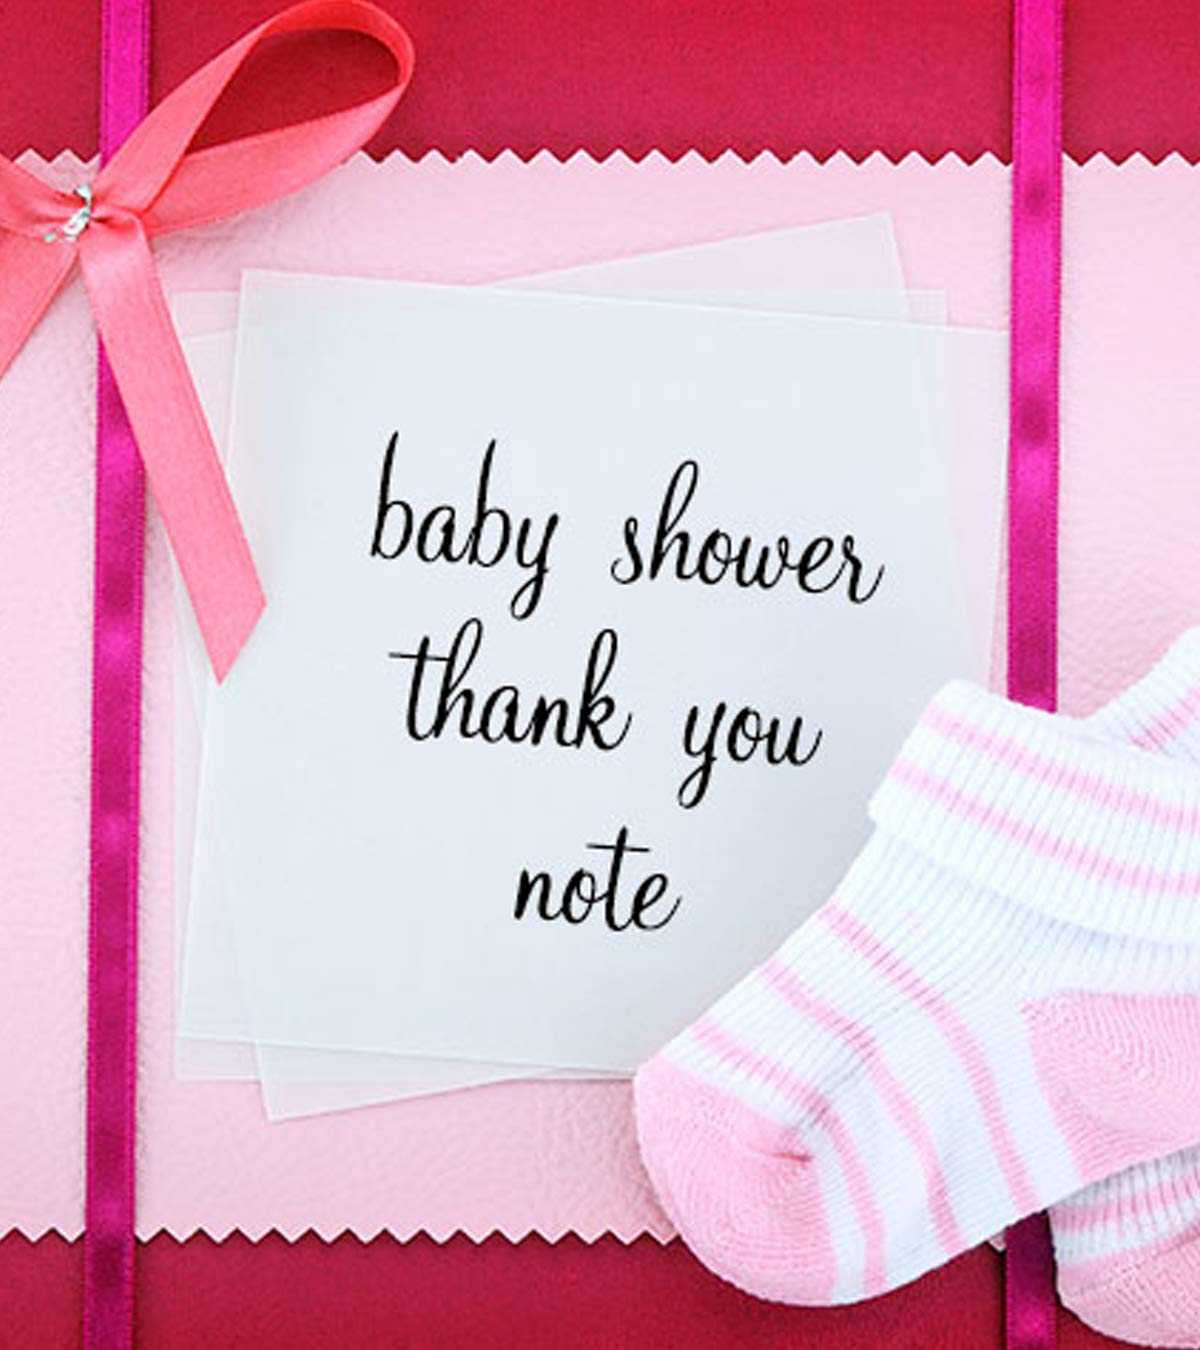 Baby Shower Thank You Notes: What To Write In A Thank You Card In Template For Baby Shower Thank You Cards